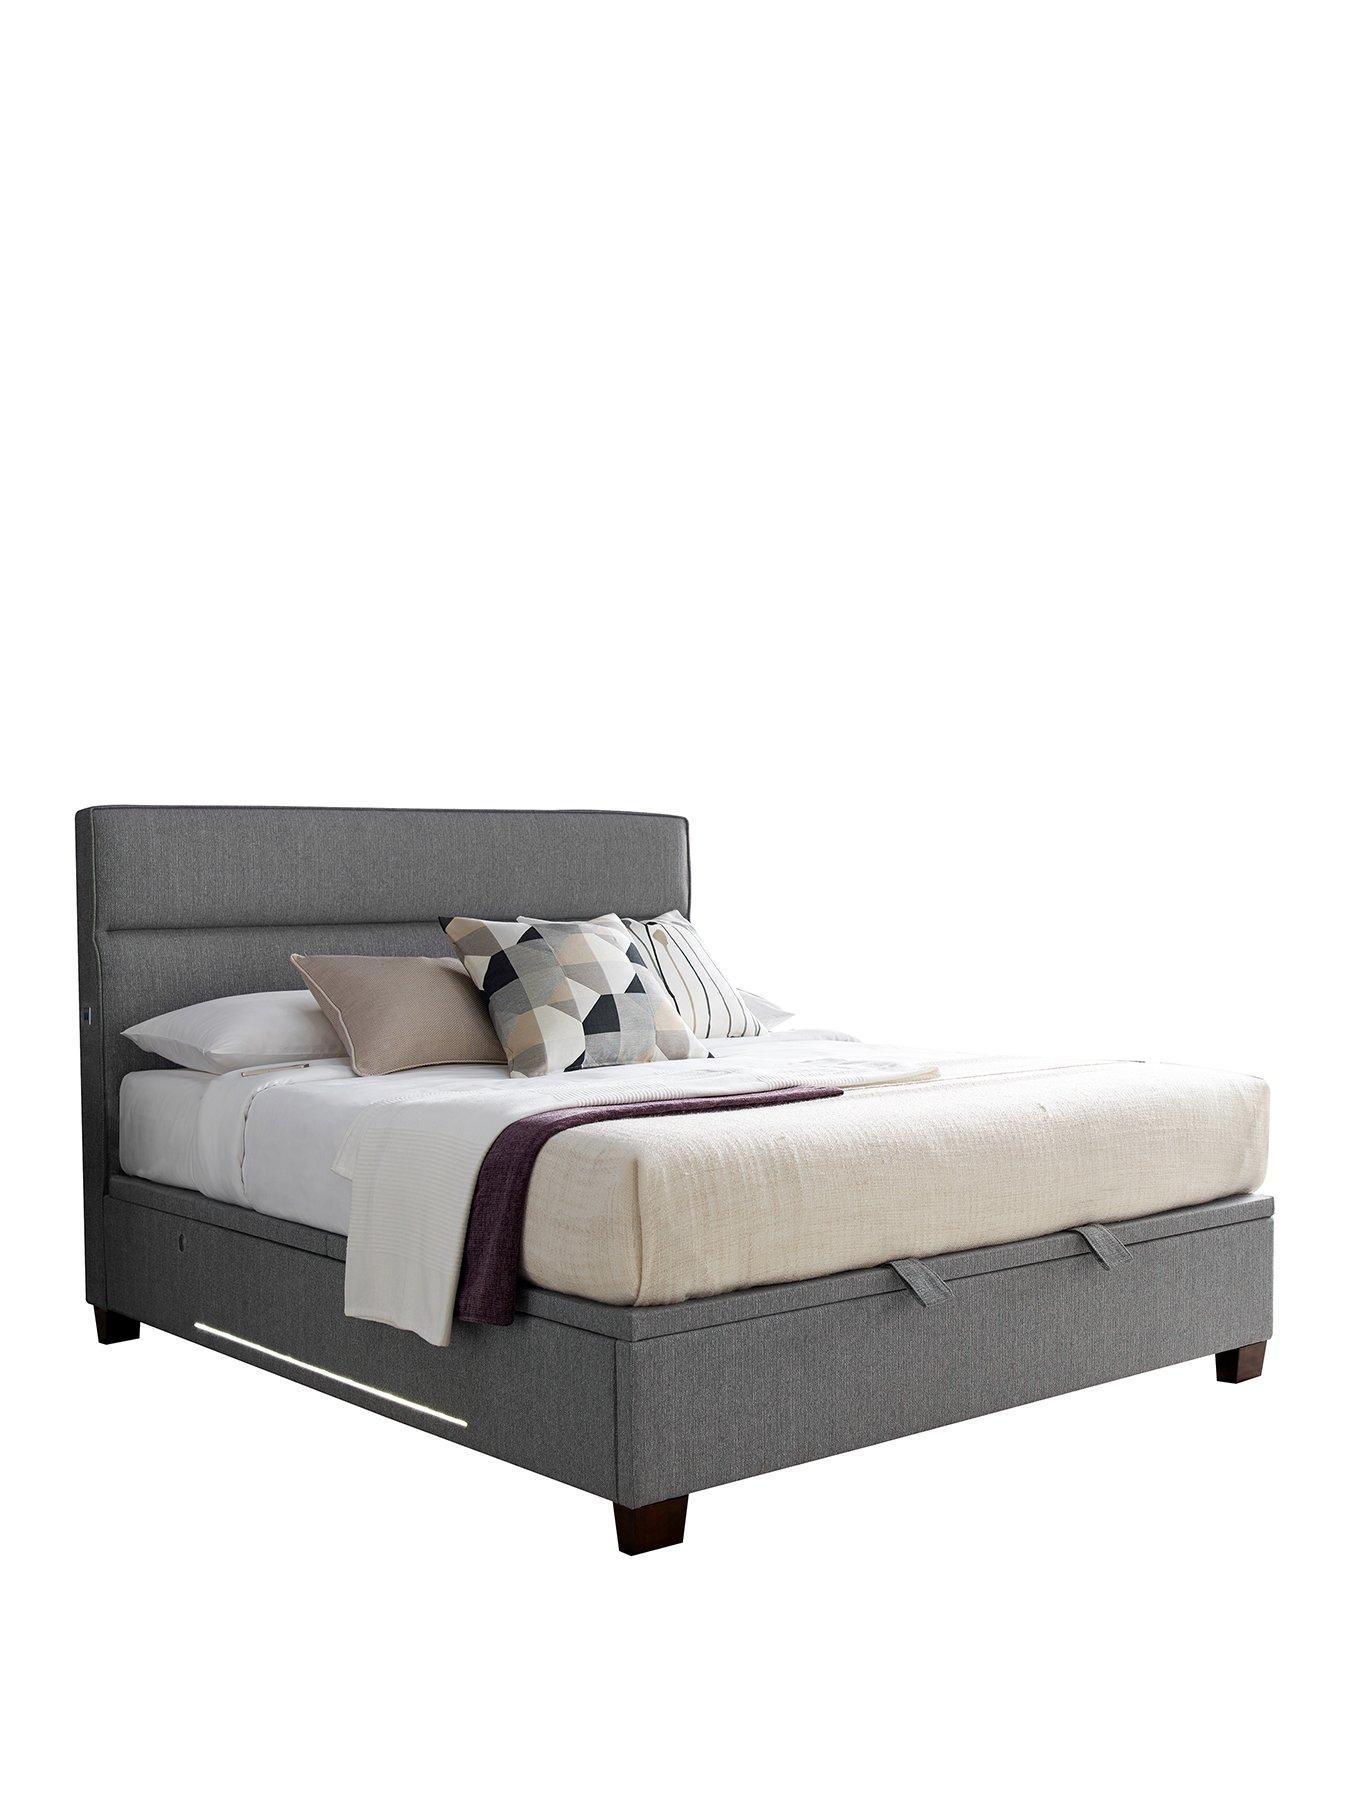 Tokyo Ottoman Storage Bed With Mattress Options Usb Charging Lights And Optional Next Day Delivery